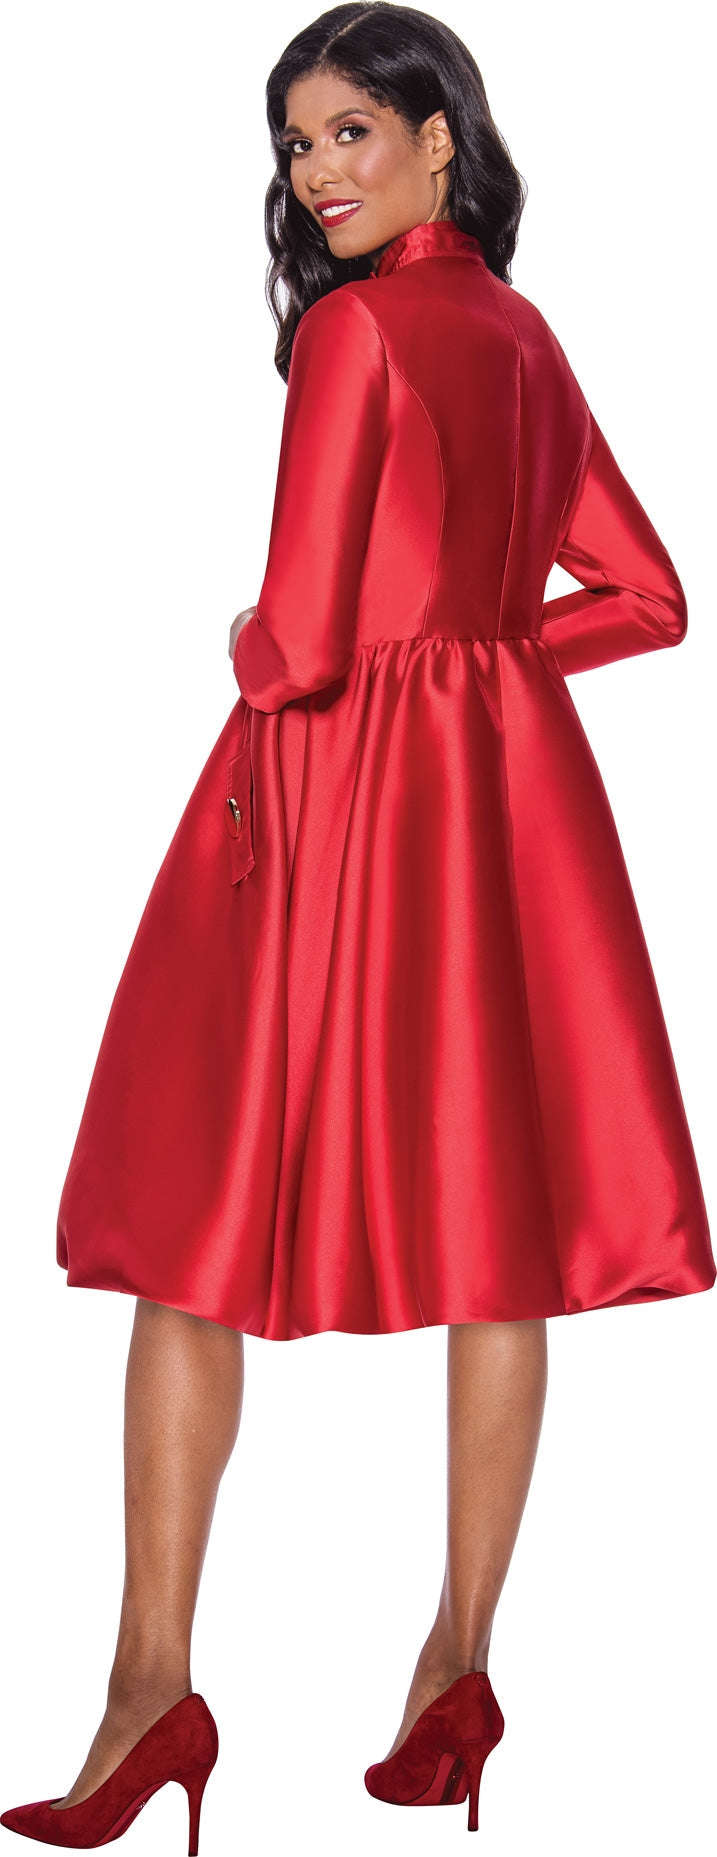 Church Dress By Nubiano 12241-Red - Church Suits For Less